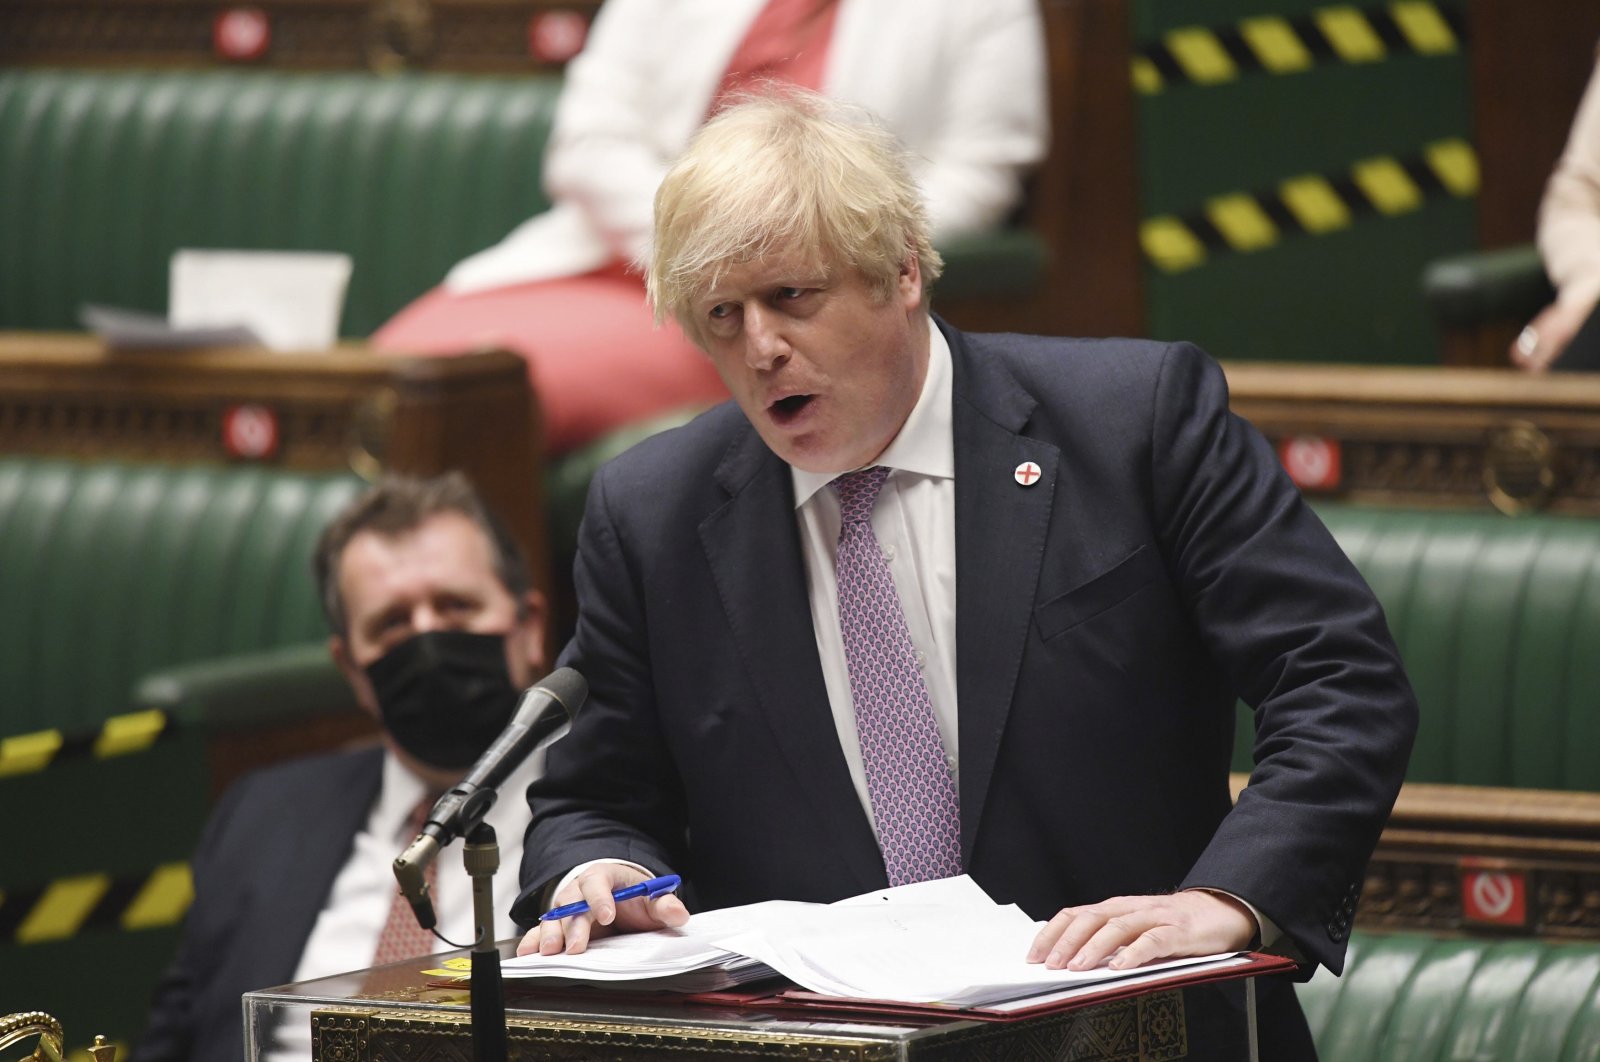 Britain's Prime Minister Boris Johnson speaks during Prime Minister's Questions in the House of Commons, London, Wednesday, July 7, 2021. (AP Photo)